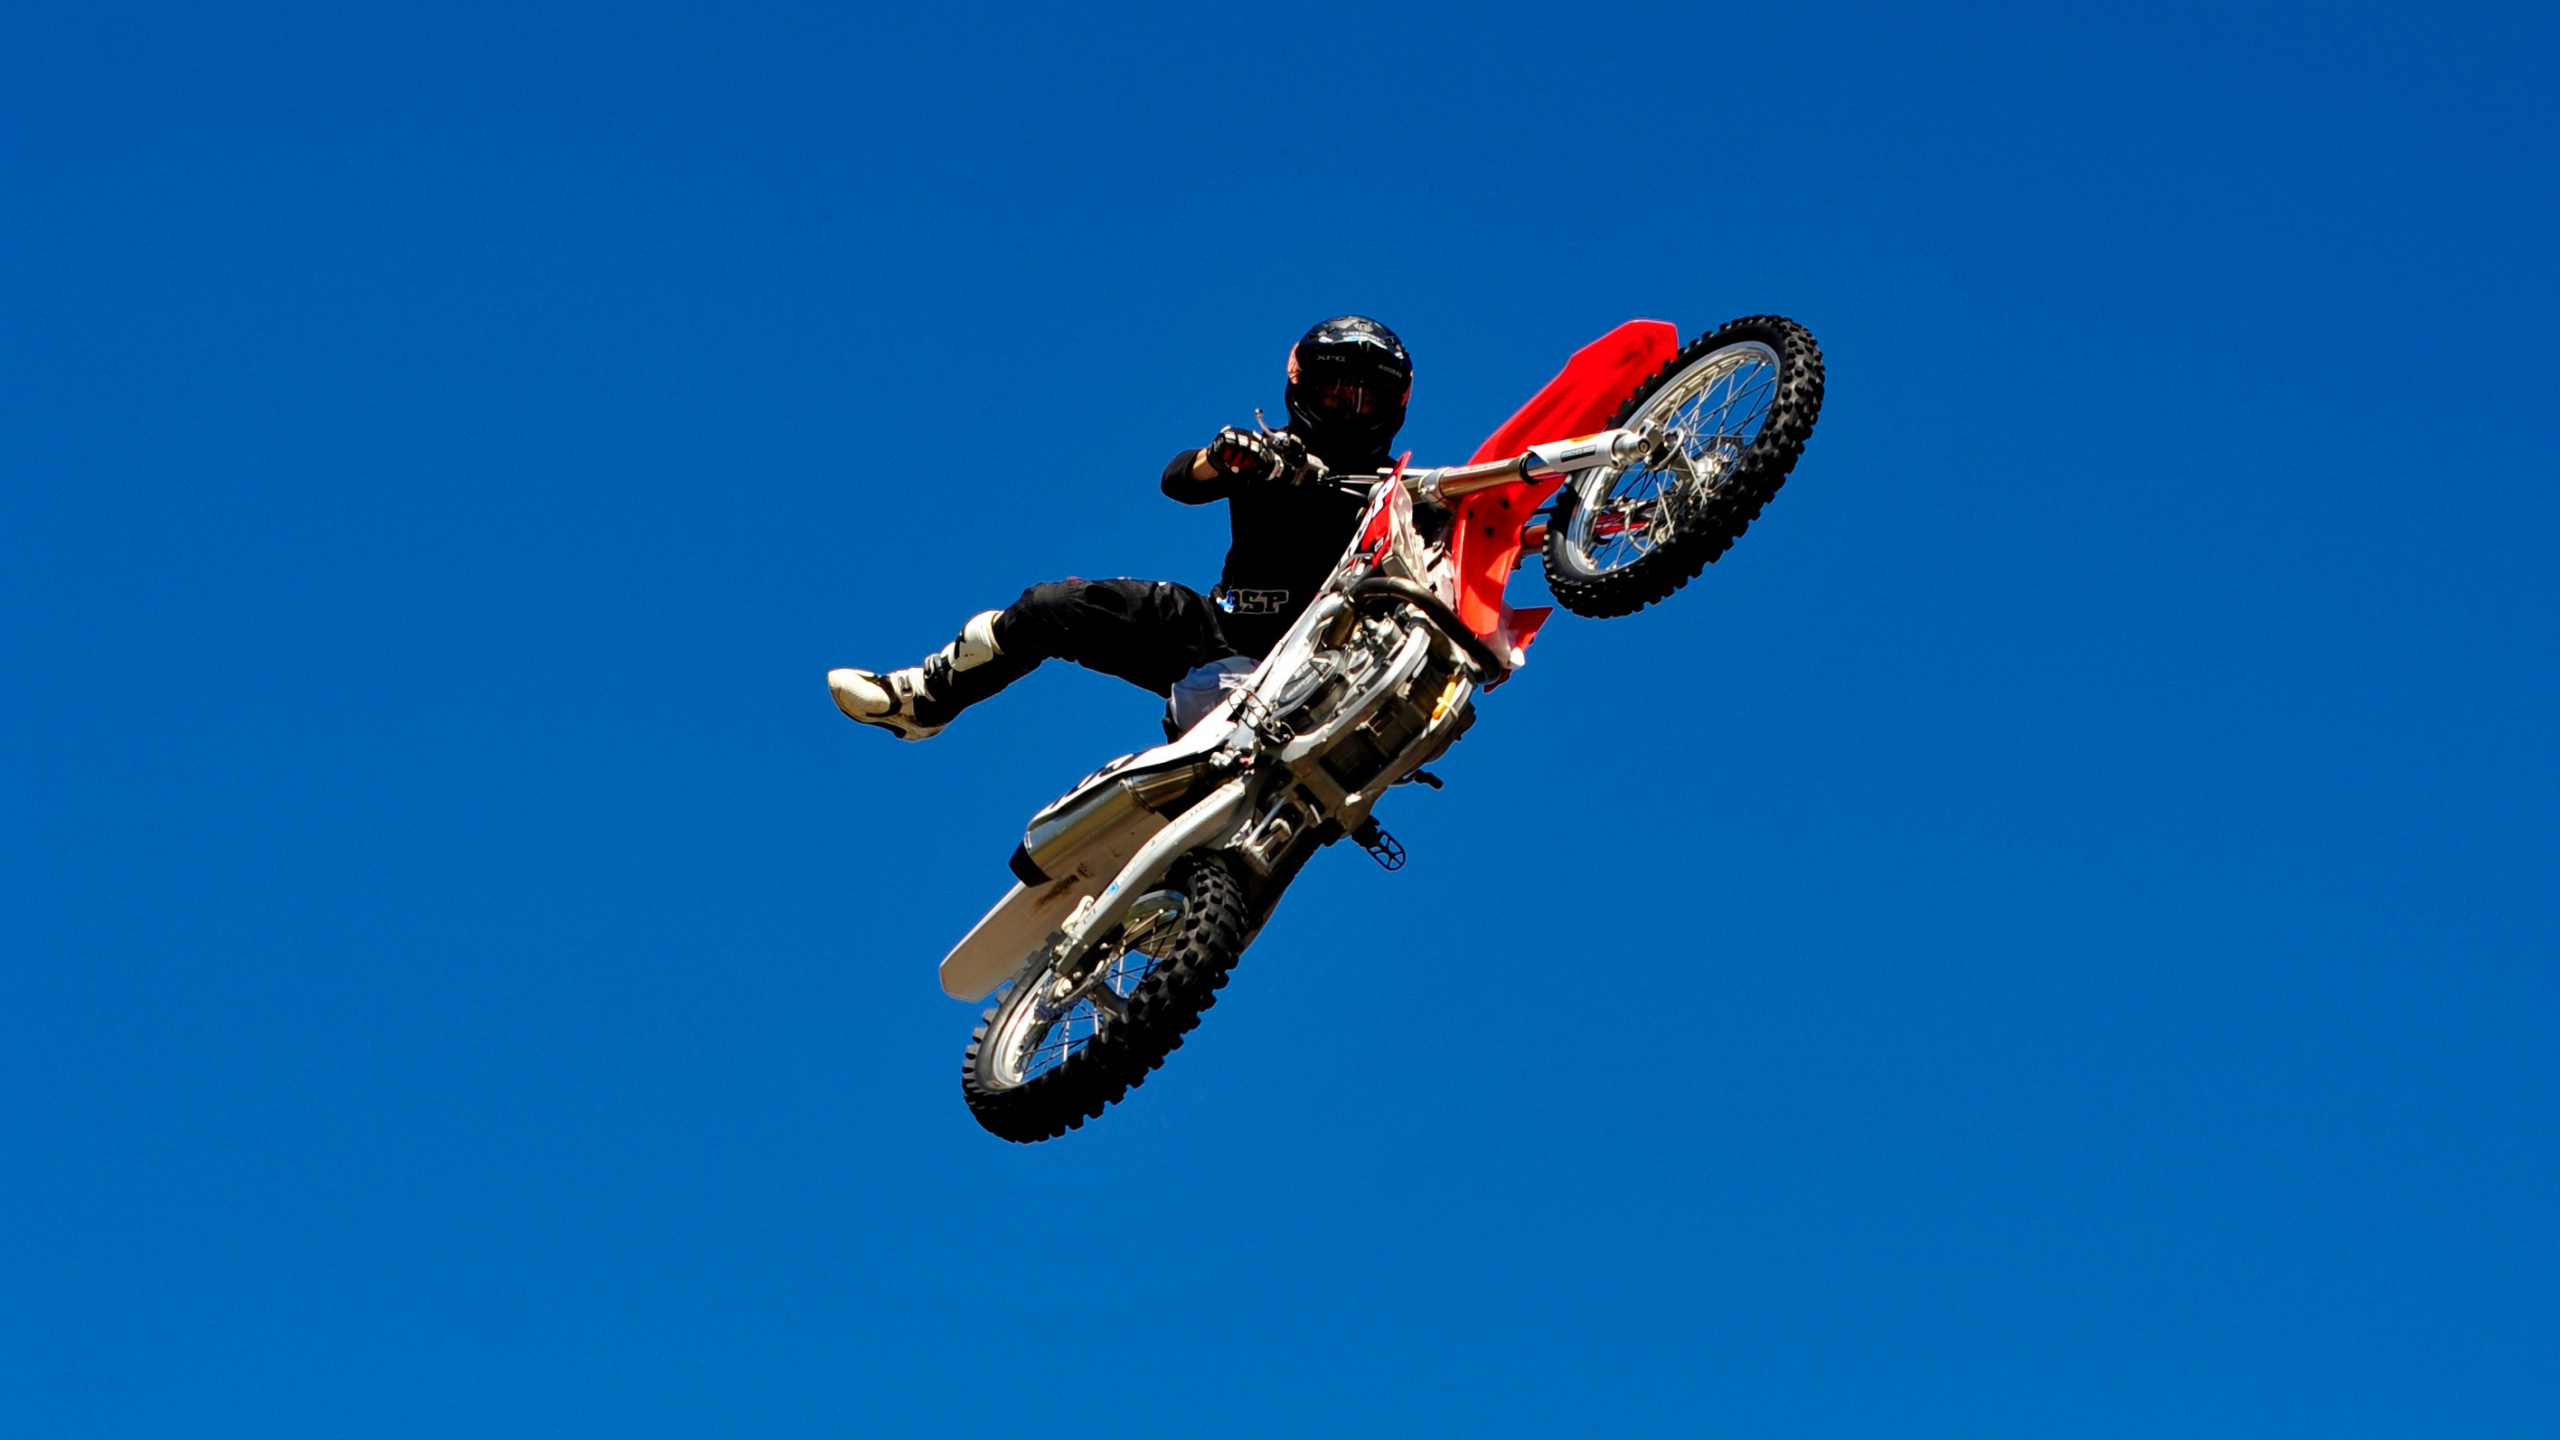 Man in Red and Black Motocross Suit Riding Red and White Motocross Dirt Bike. Wallpaper in 2560x1440 Resolution